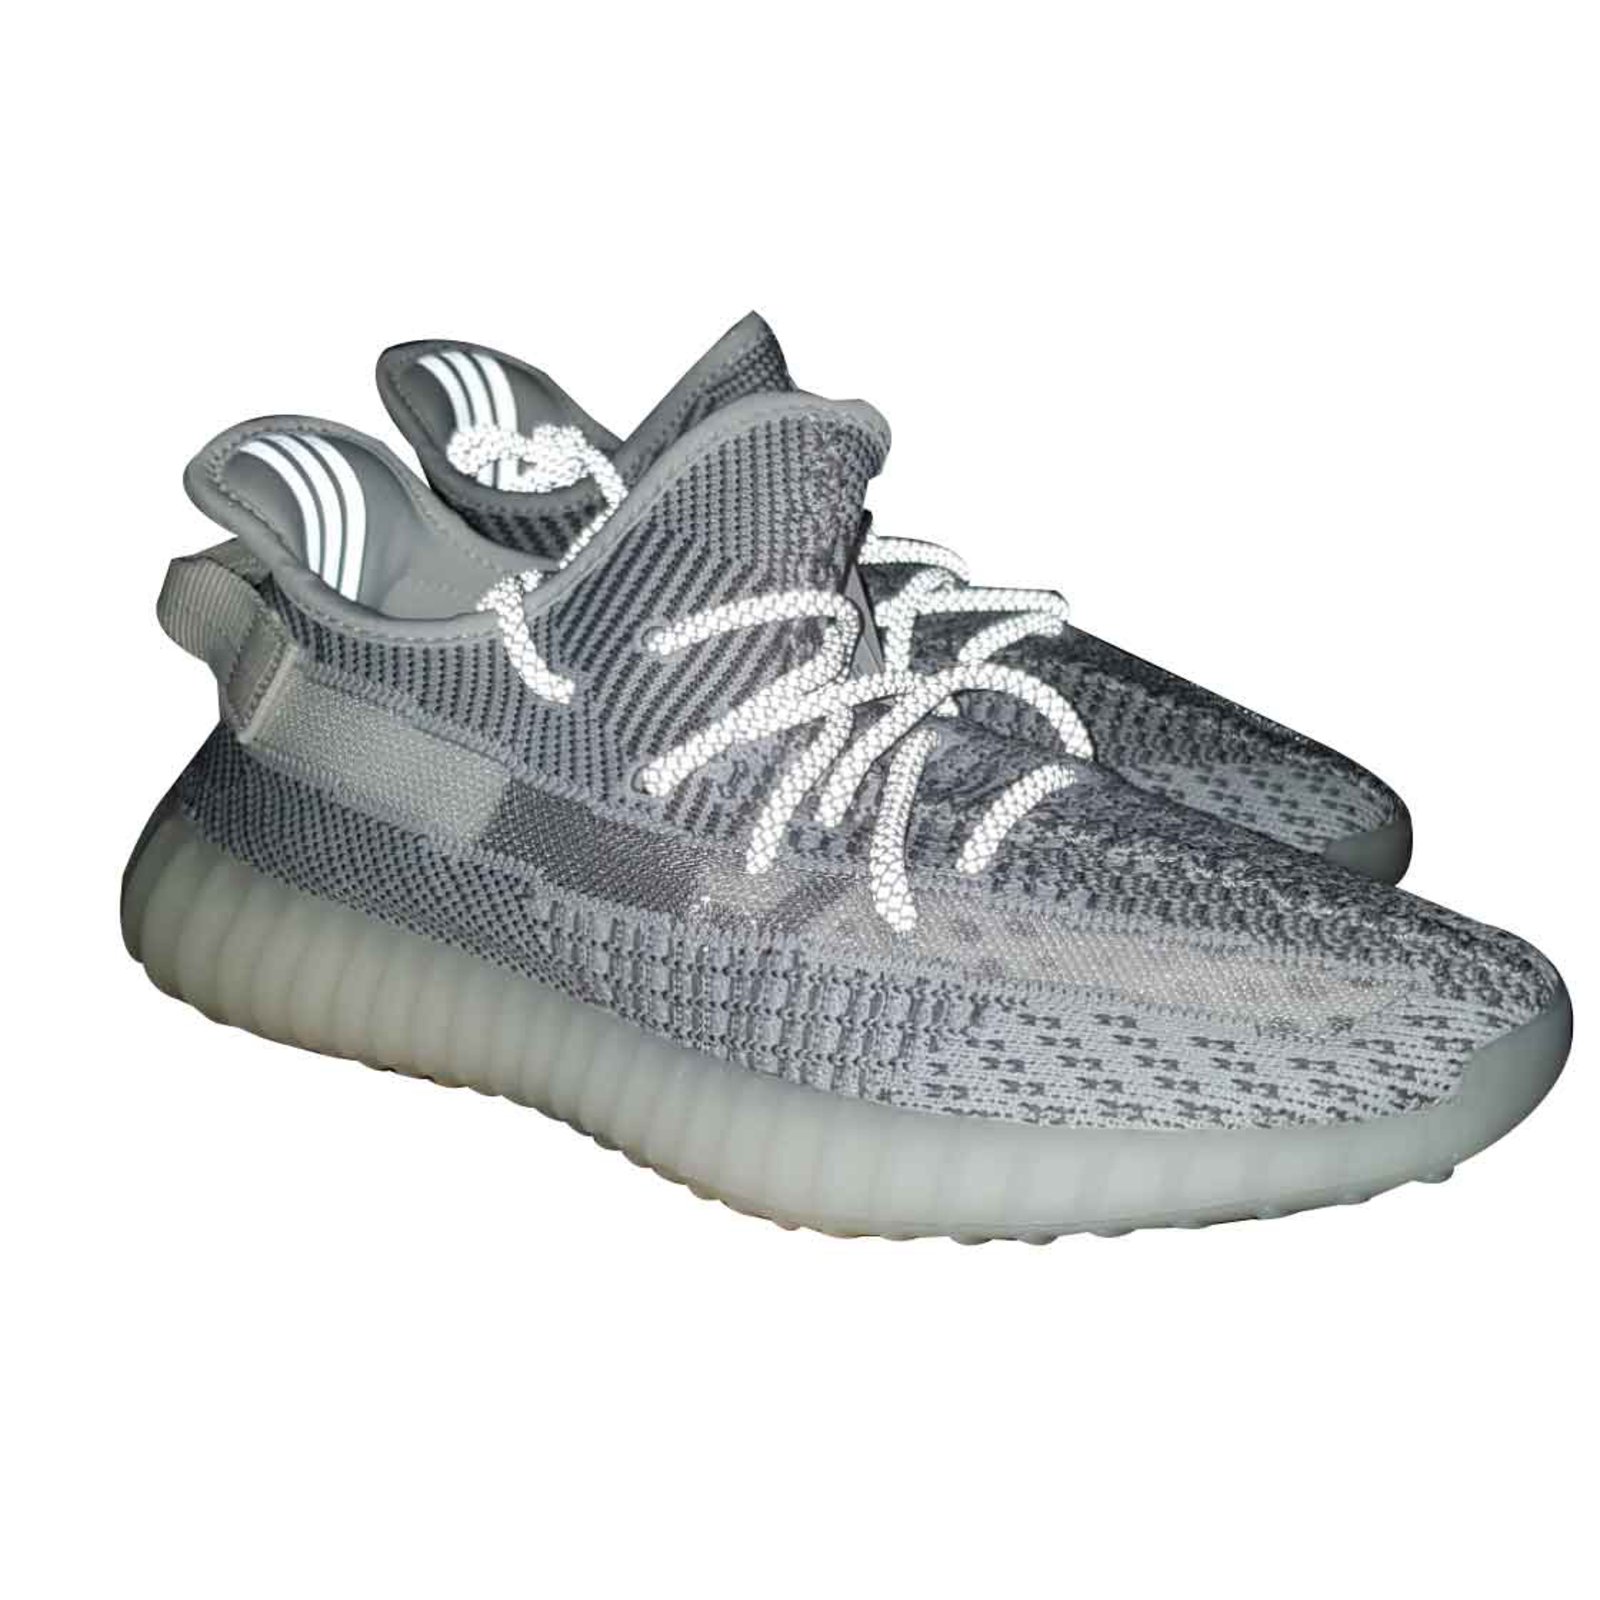 adidas yeezy blanche et grise